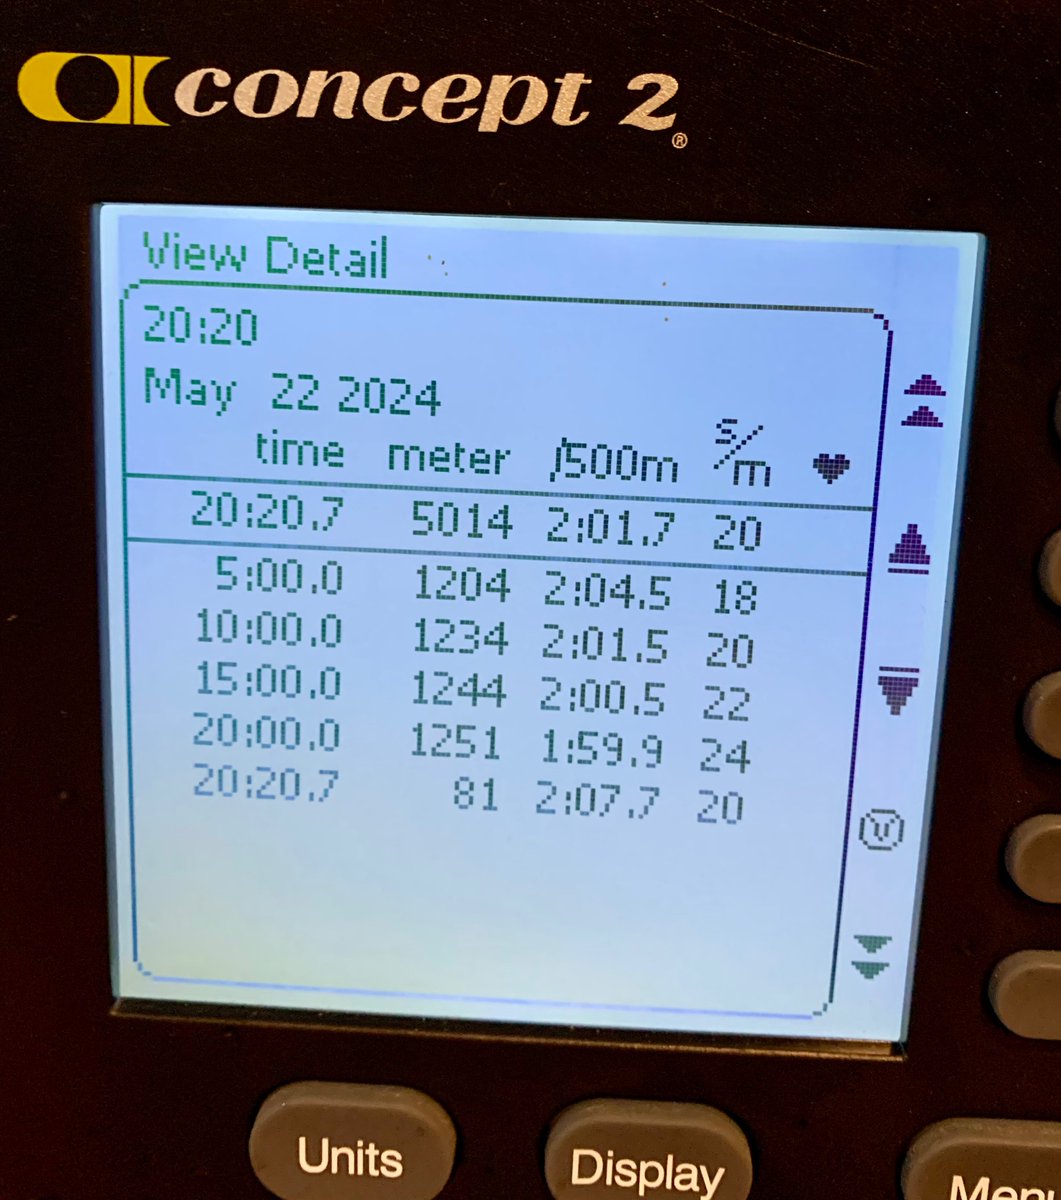 Very happy with that after a very flat start. My soul is reset. #concept2